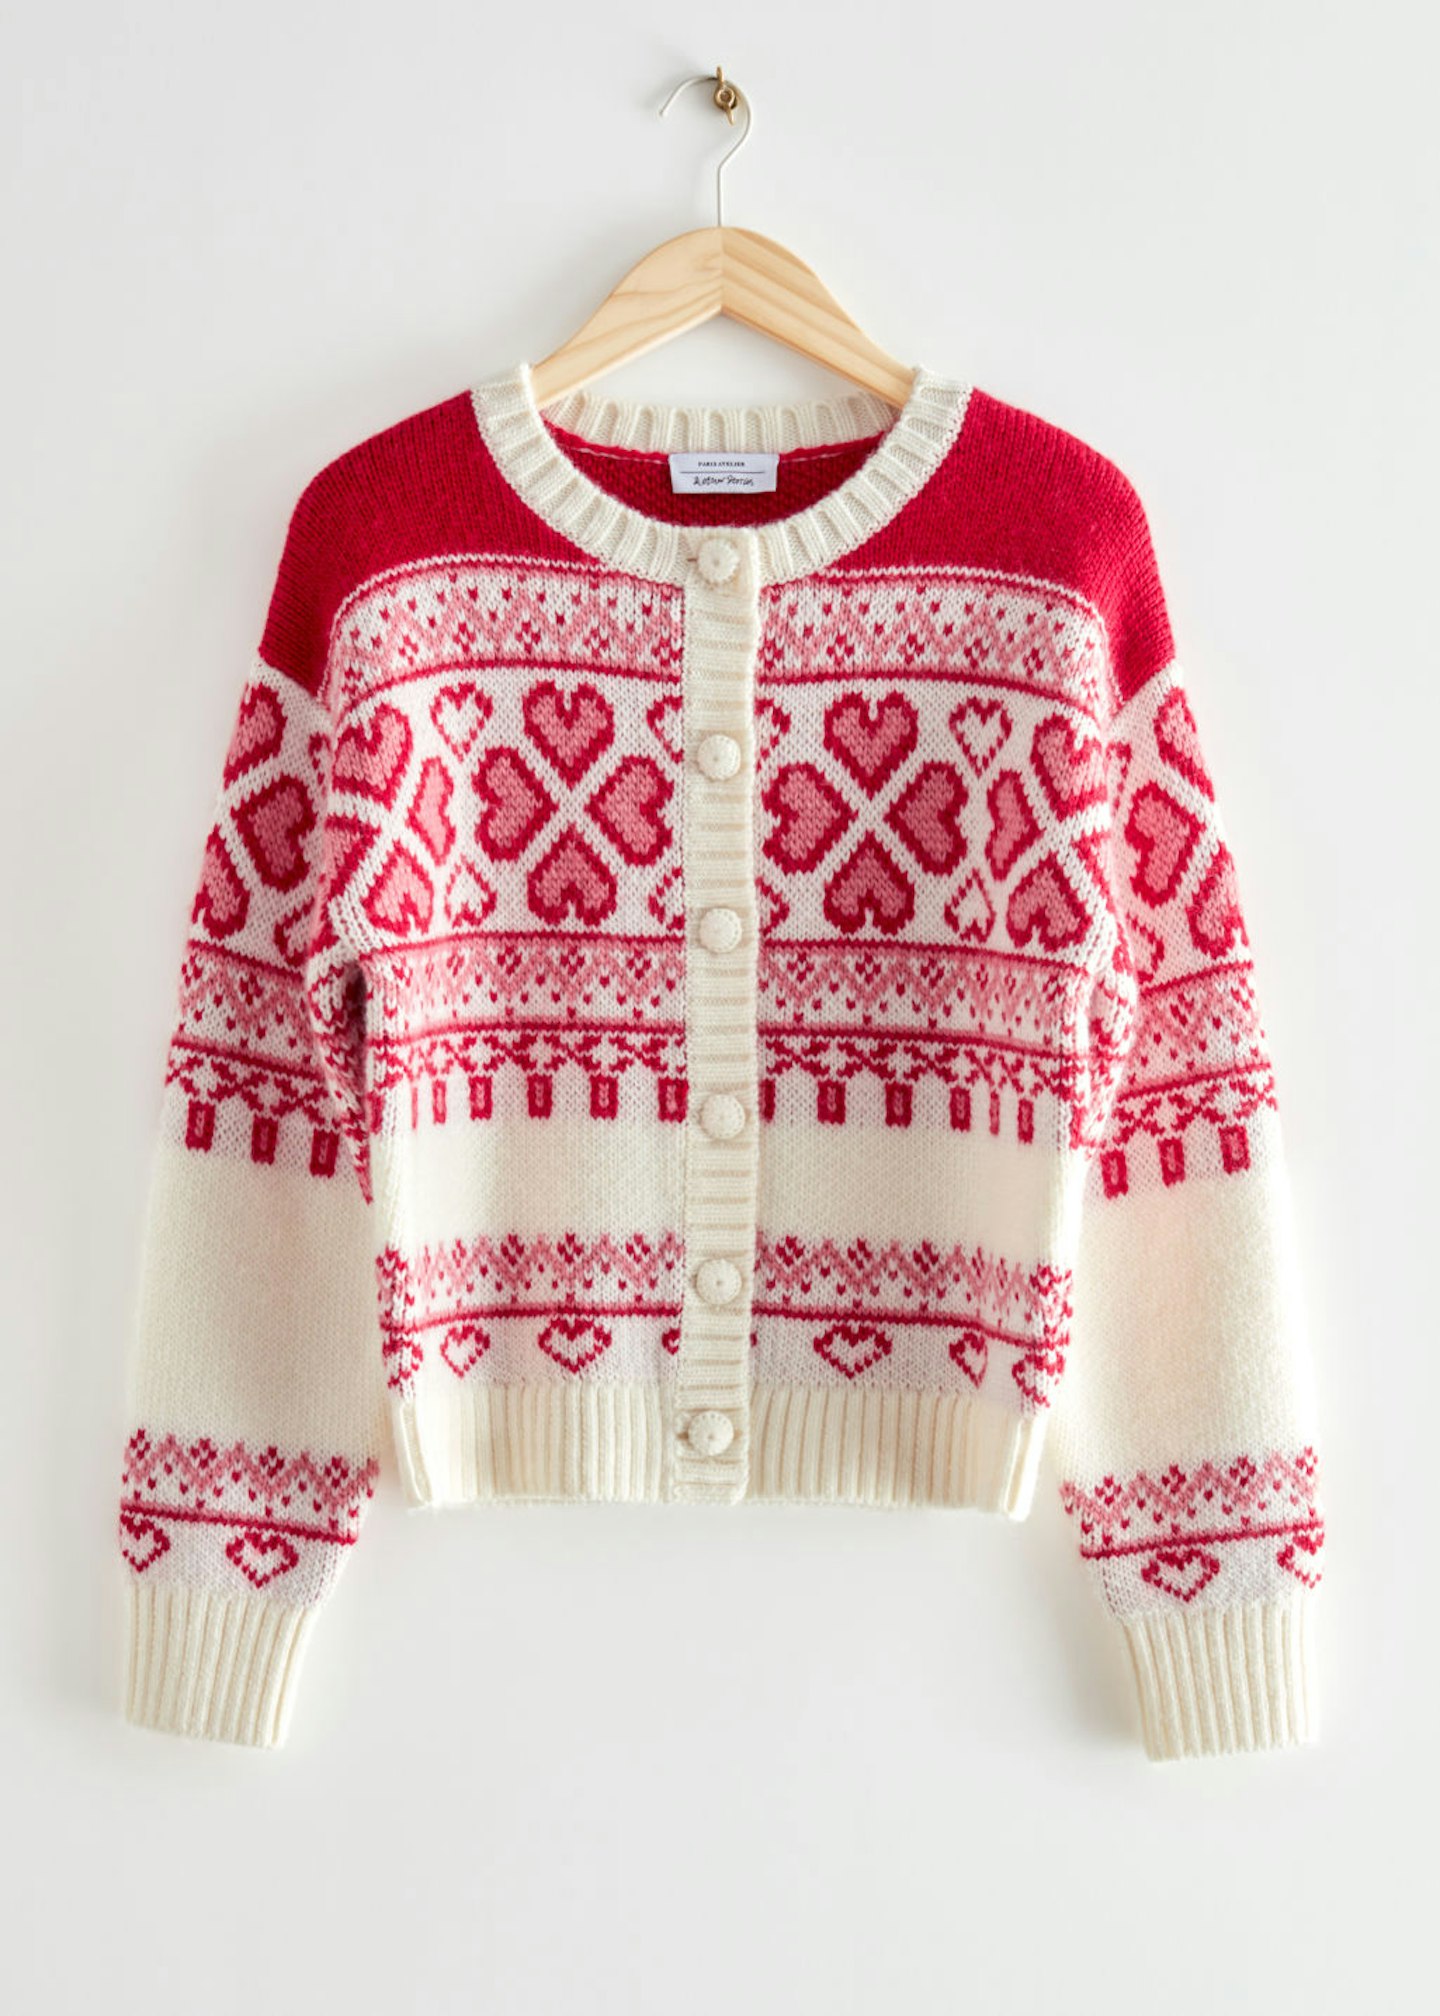 & Other Stories, Jacquard Knit Heart Cardigan, £120